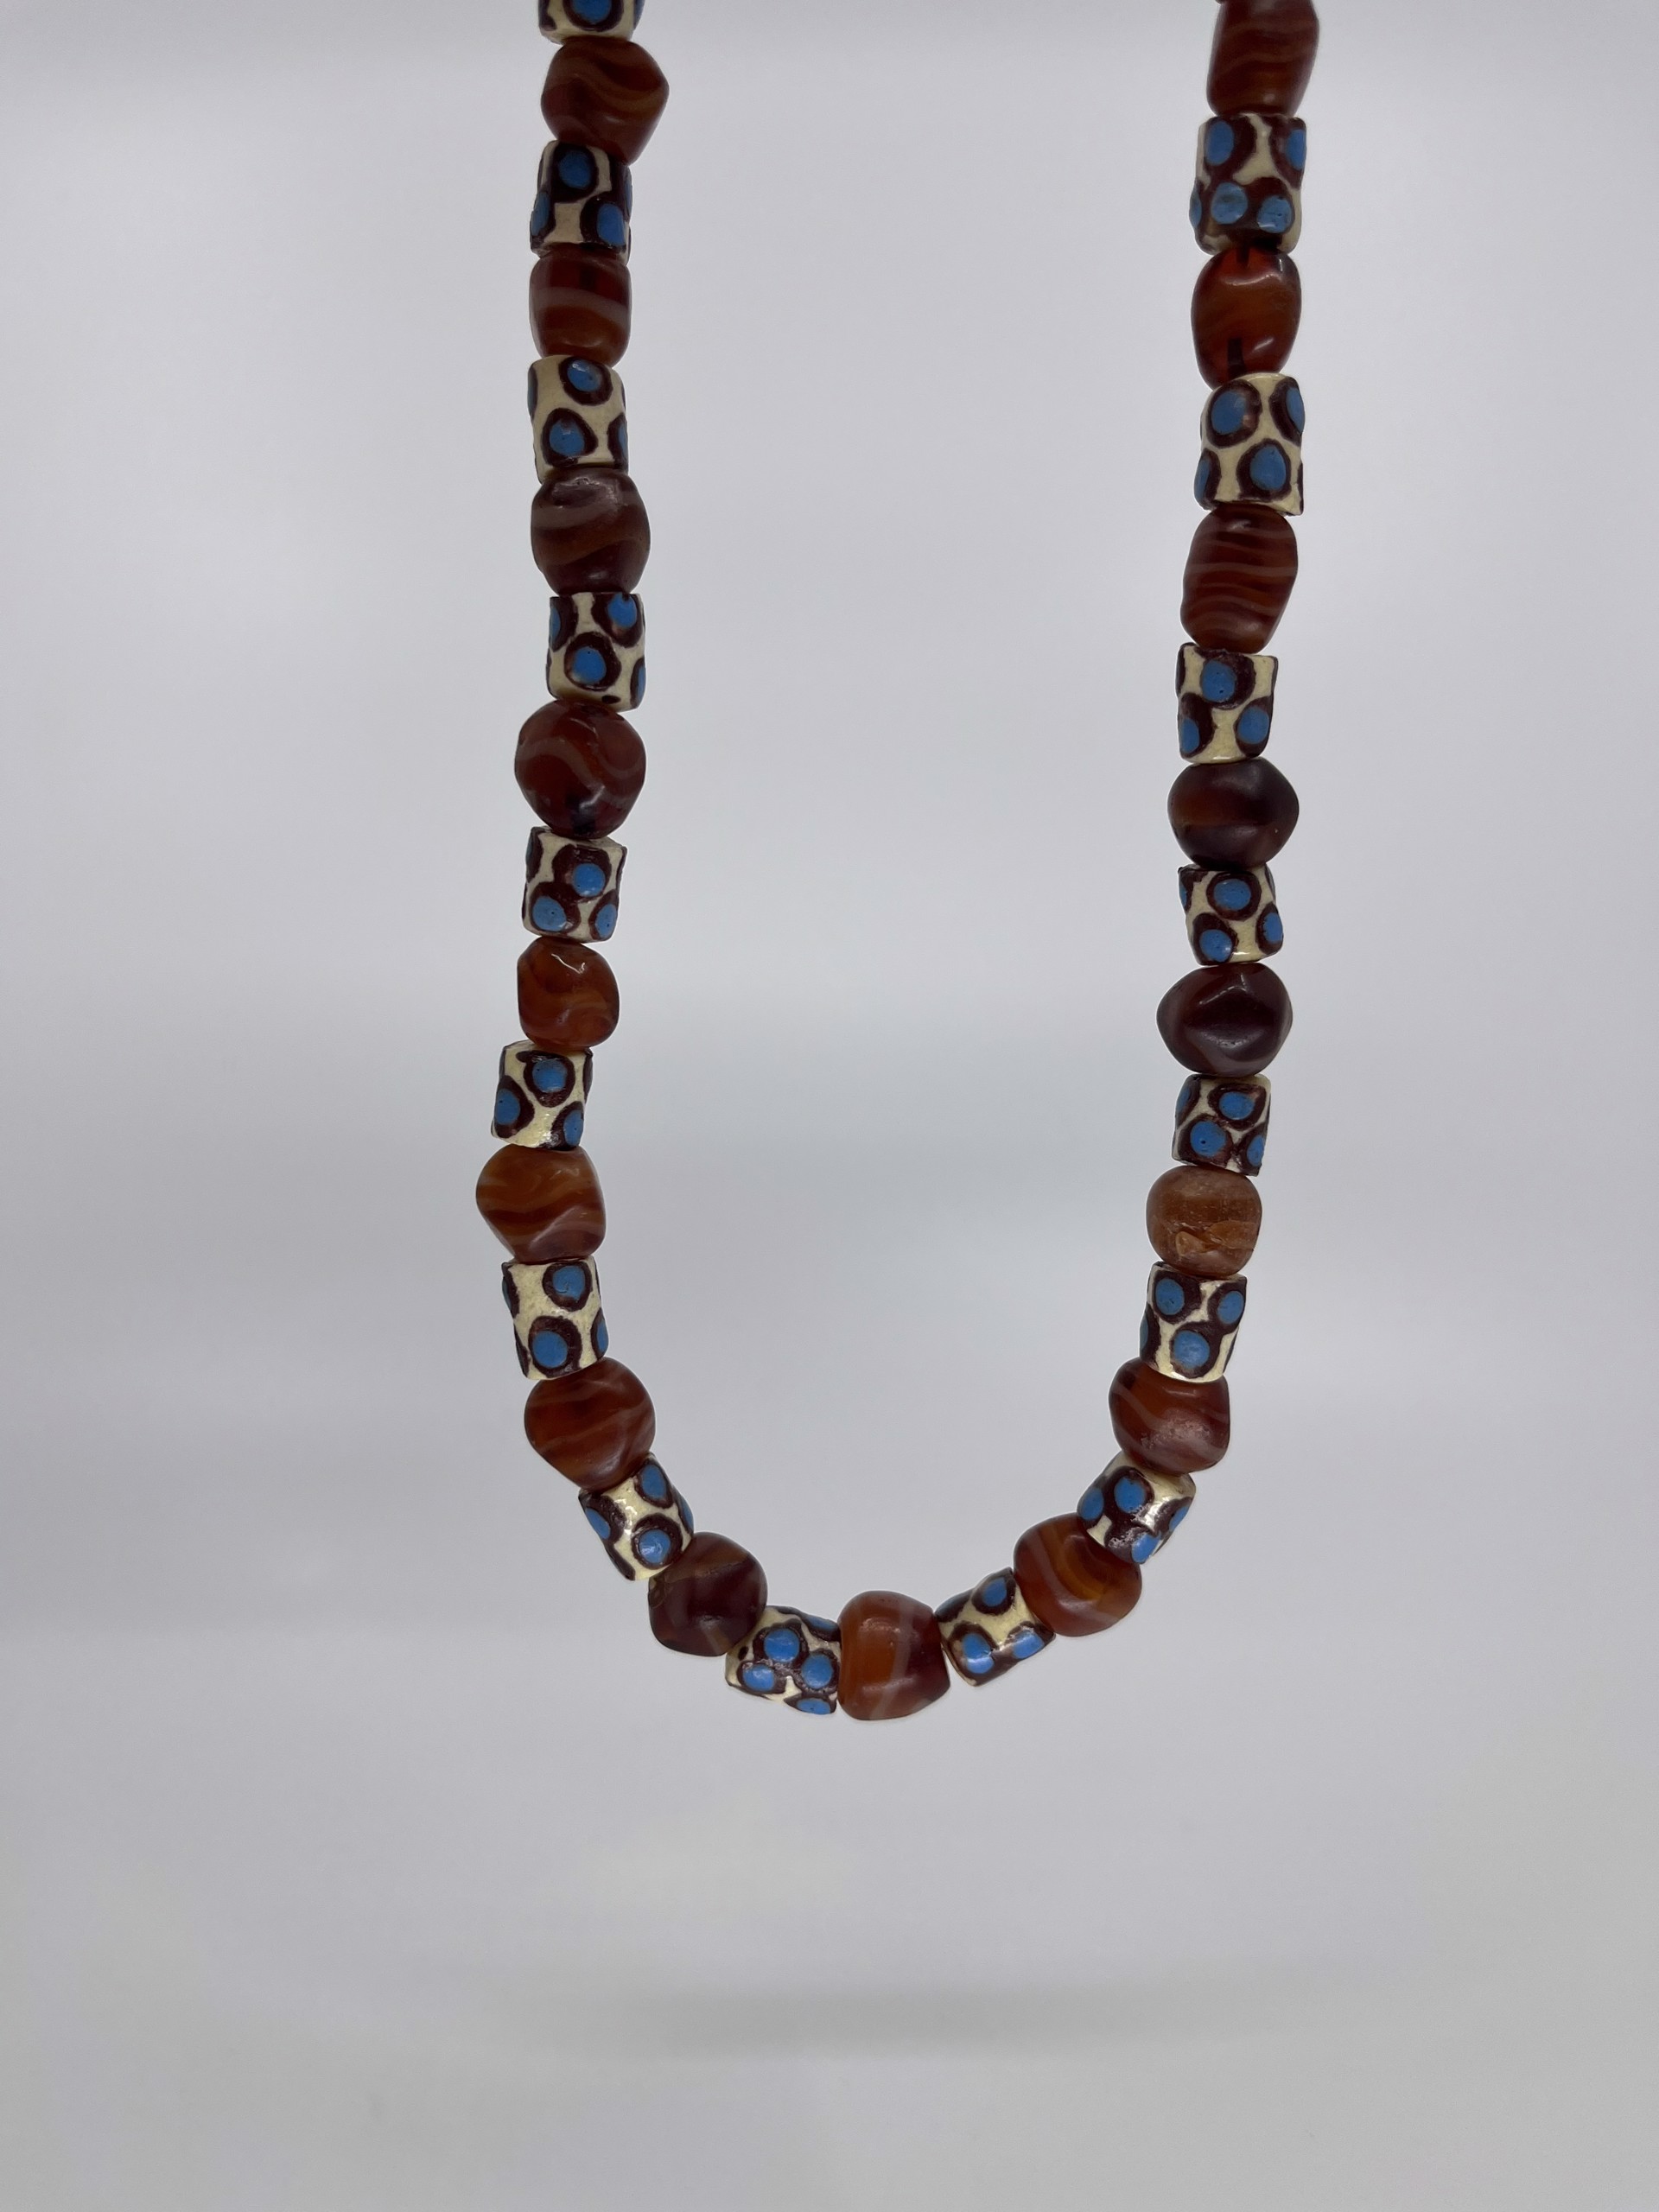 9157 African Clay Beads by Gina Caruso